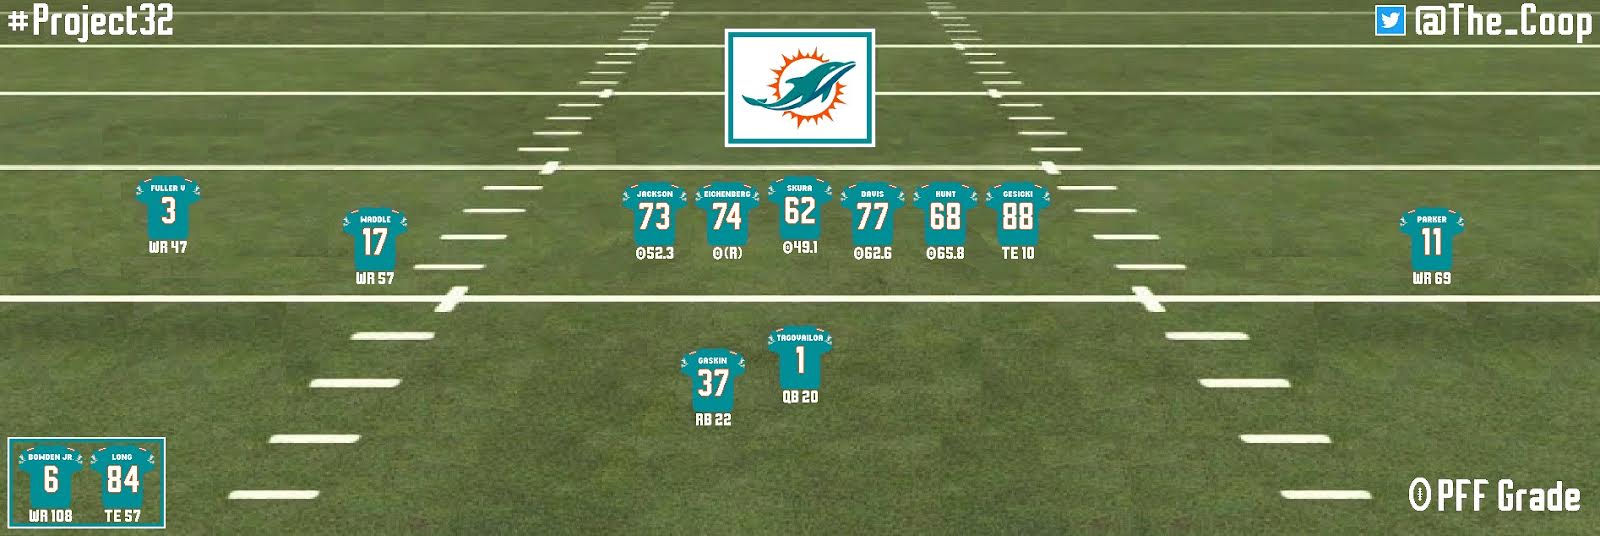 Miami Dolphins 2021 projections